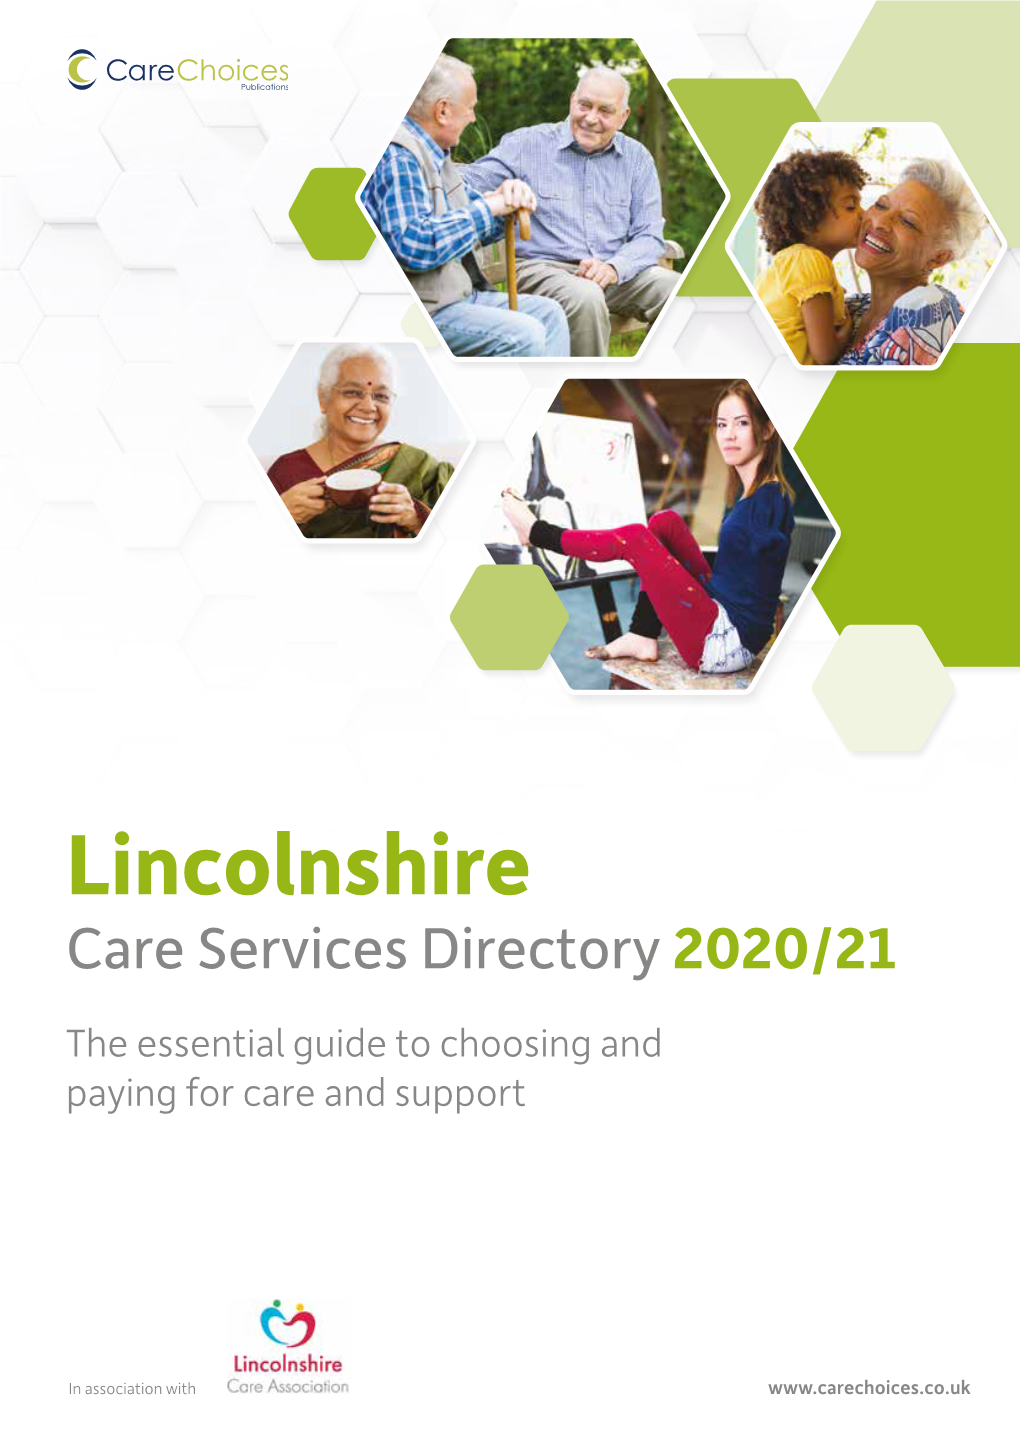 Lincolnshire Care Services Directory 2020/21